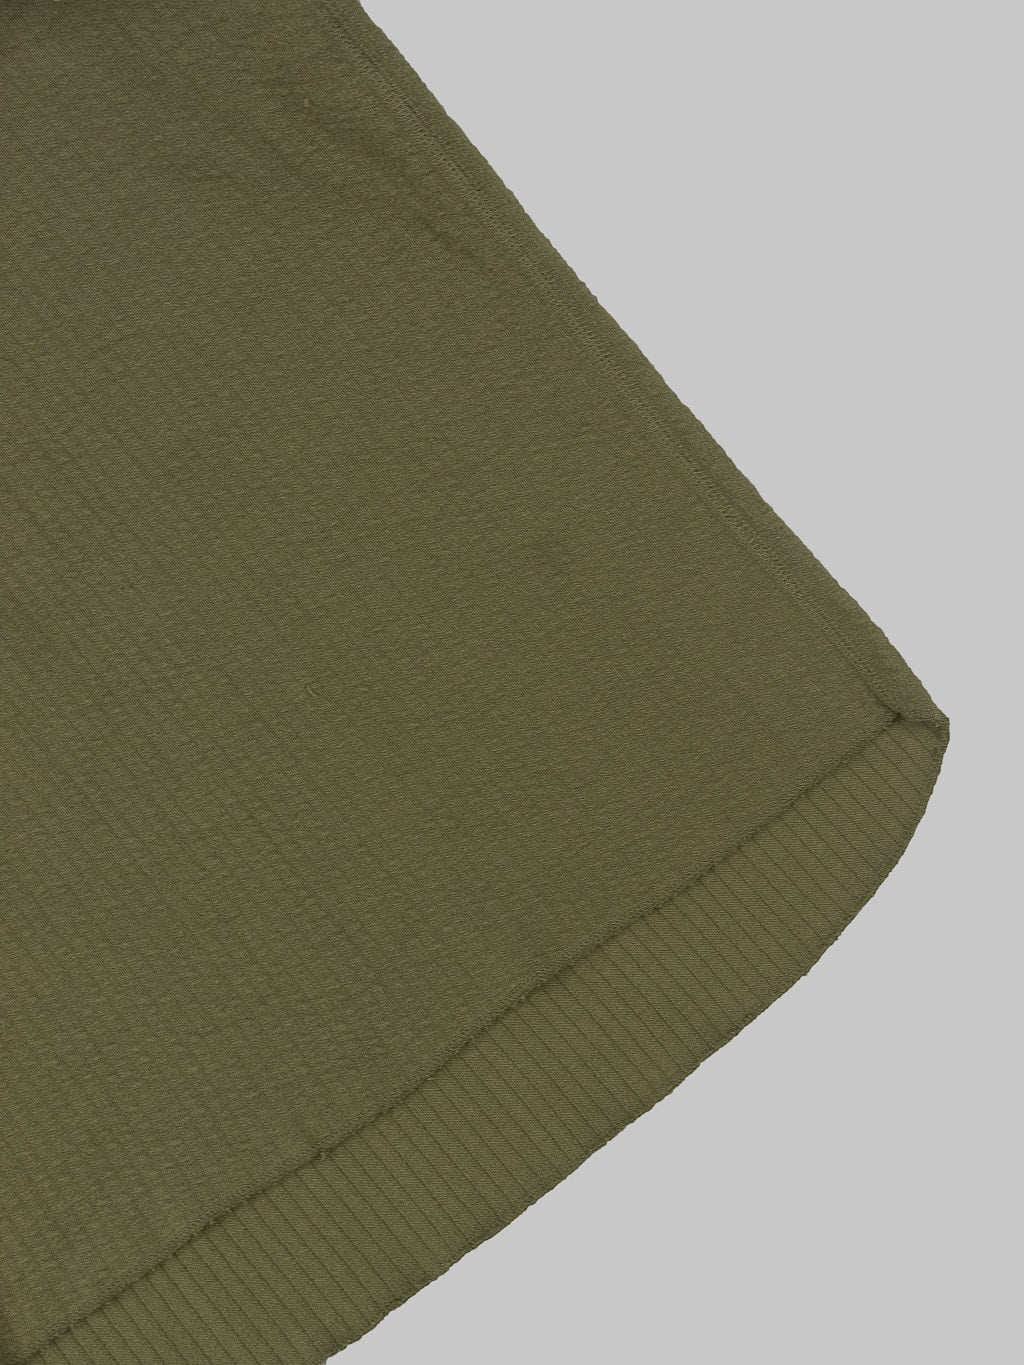 Loop Weft Double Face Jacquard henley Thermal army olive hem closeup